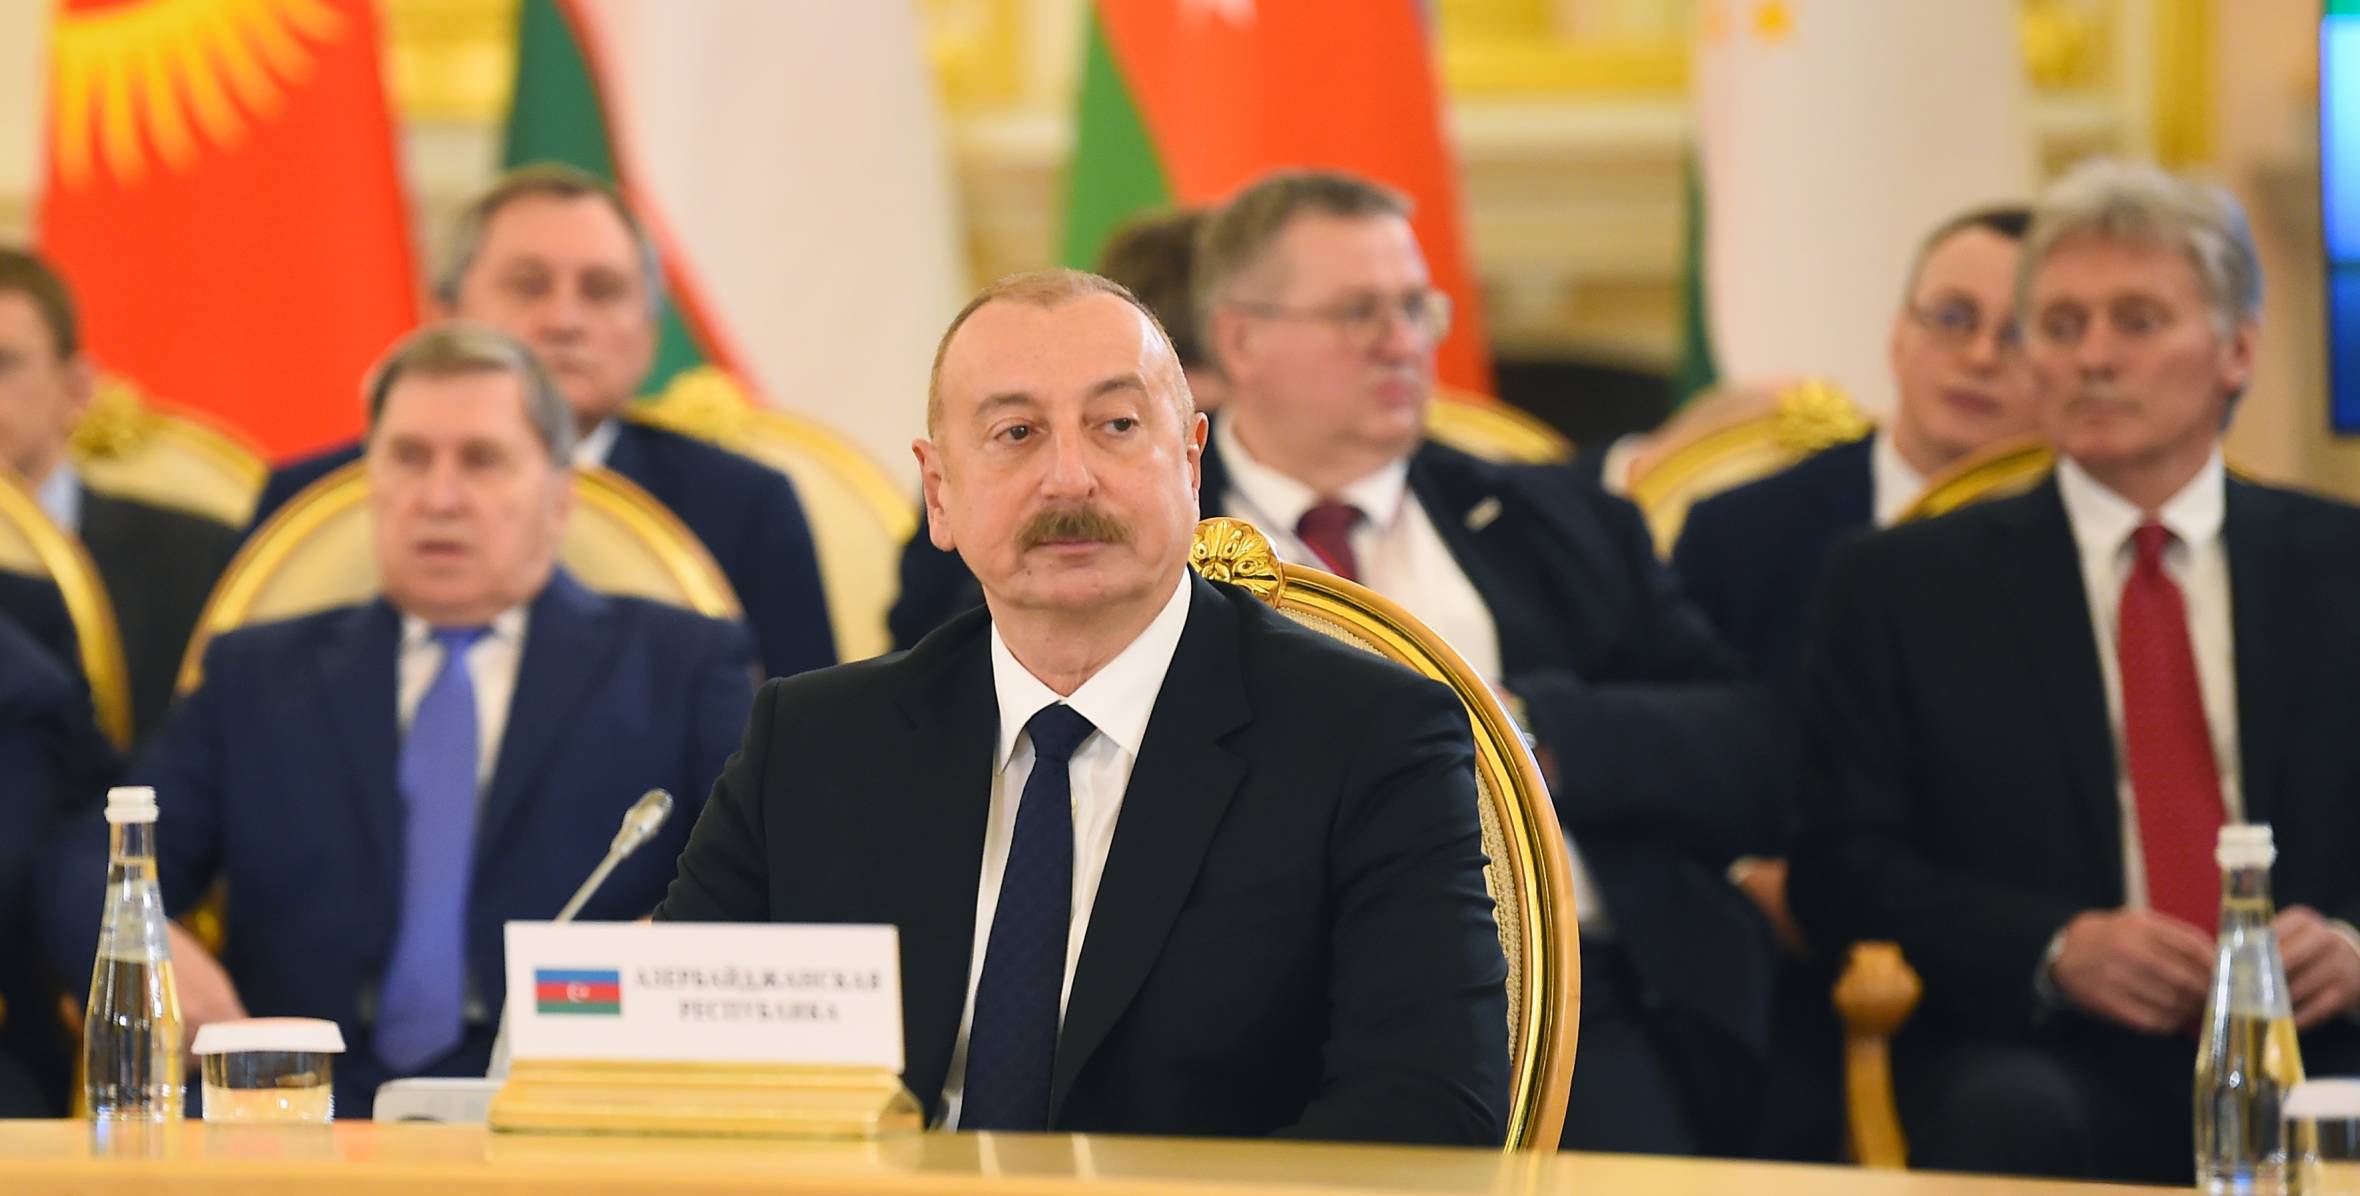 Ilham Aliyev is attending expanded meeting of Supreme Eurasian Economic Council in Moscow